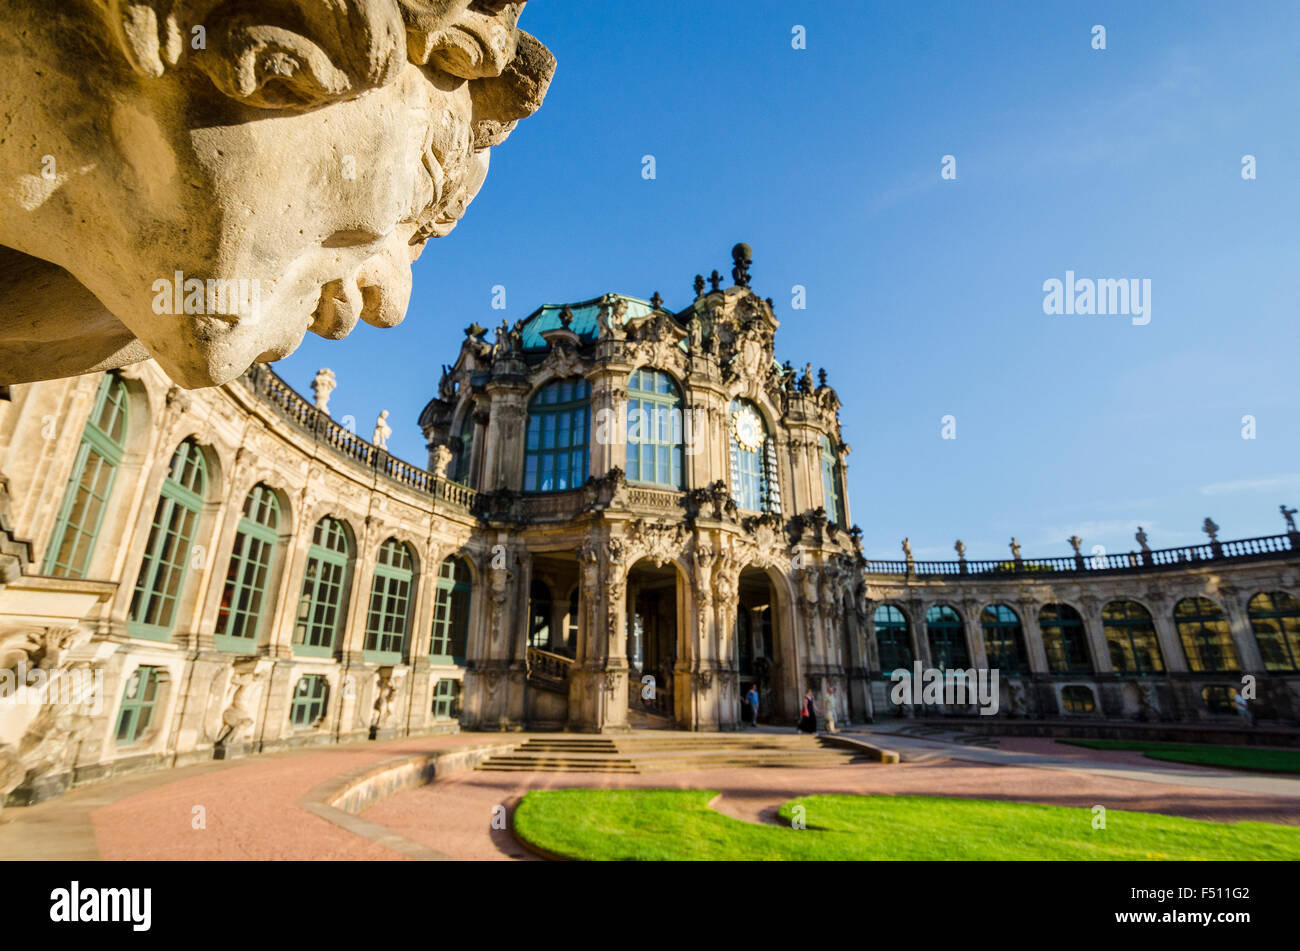 Part of the Kennel, the beautiful baroque park in the middle of town Stock Photo